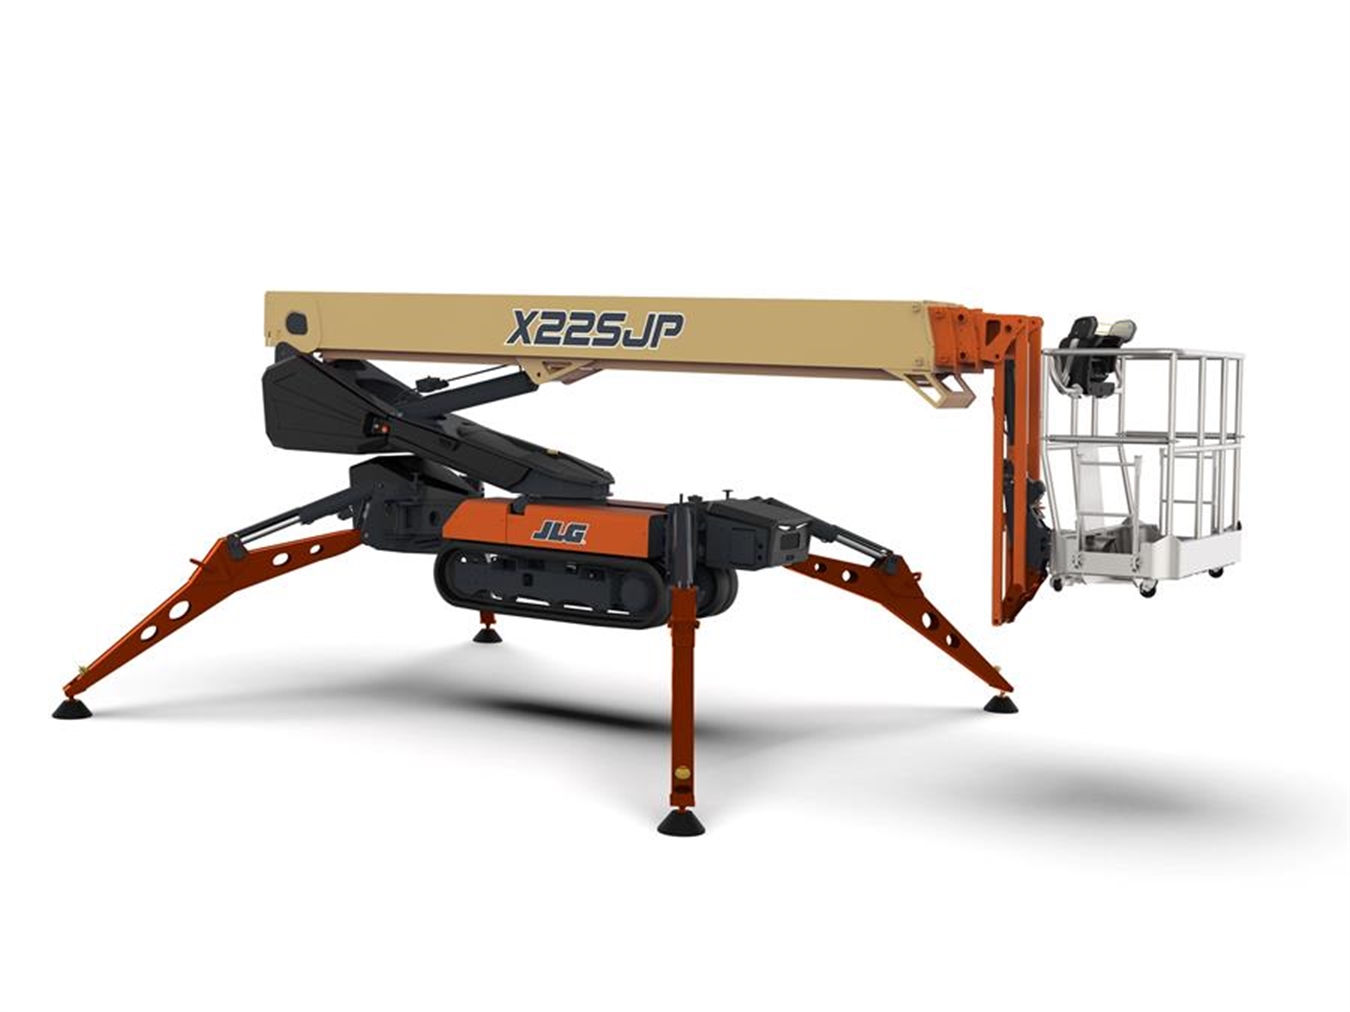 JLG launches straight boom compact crawler X22SJP